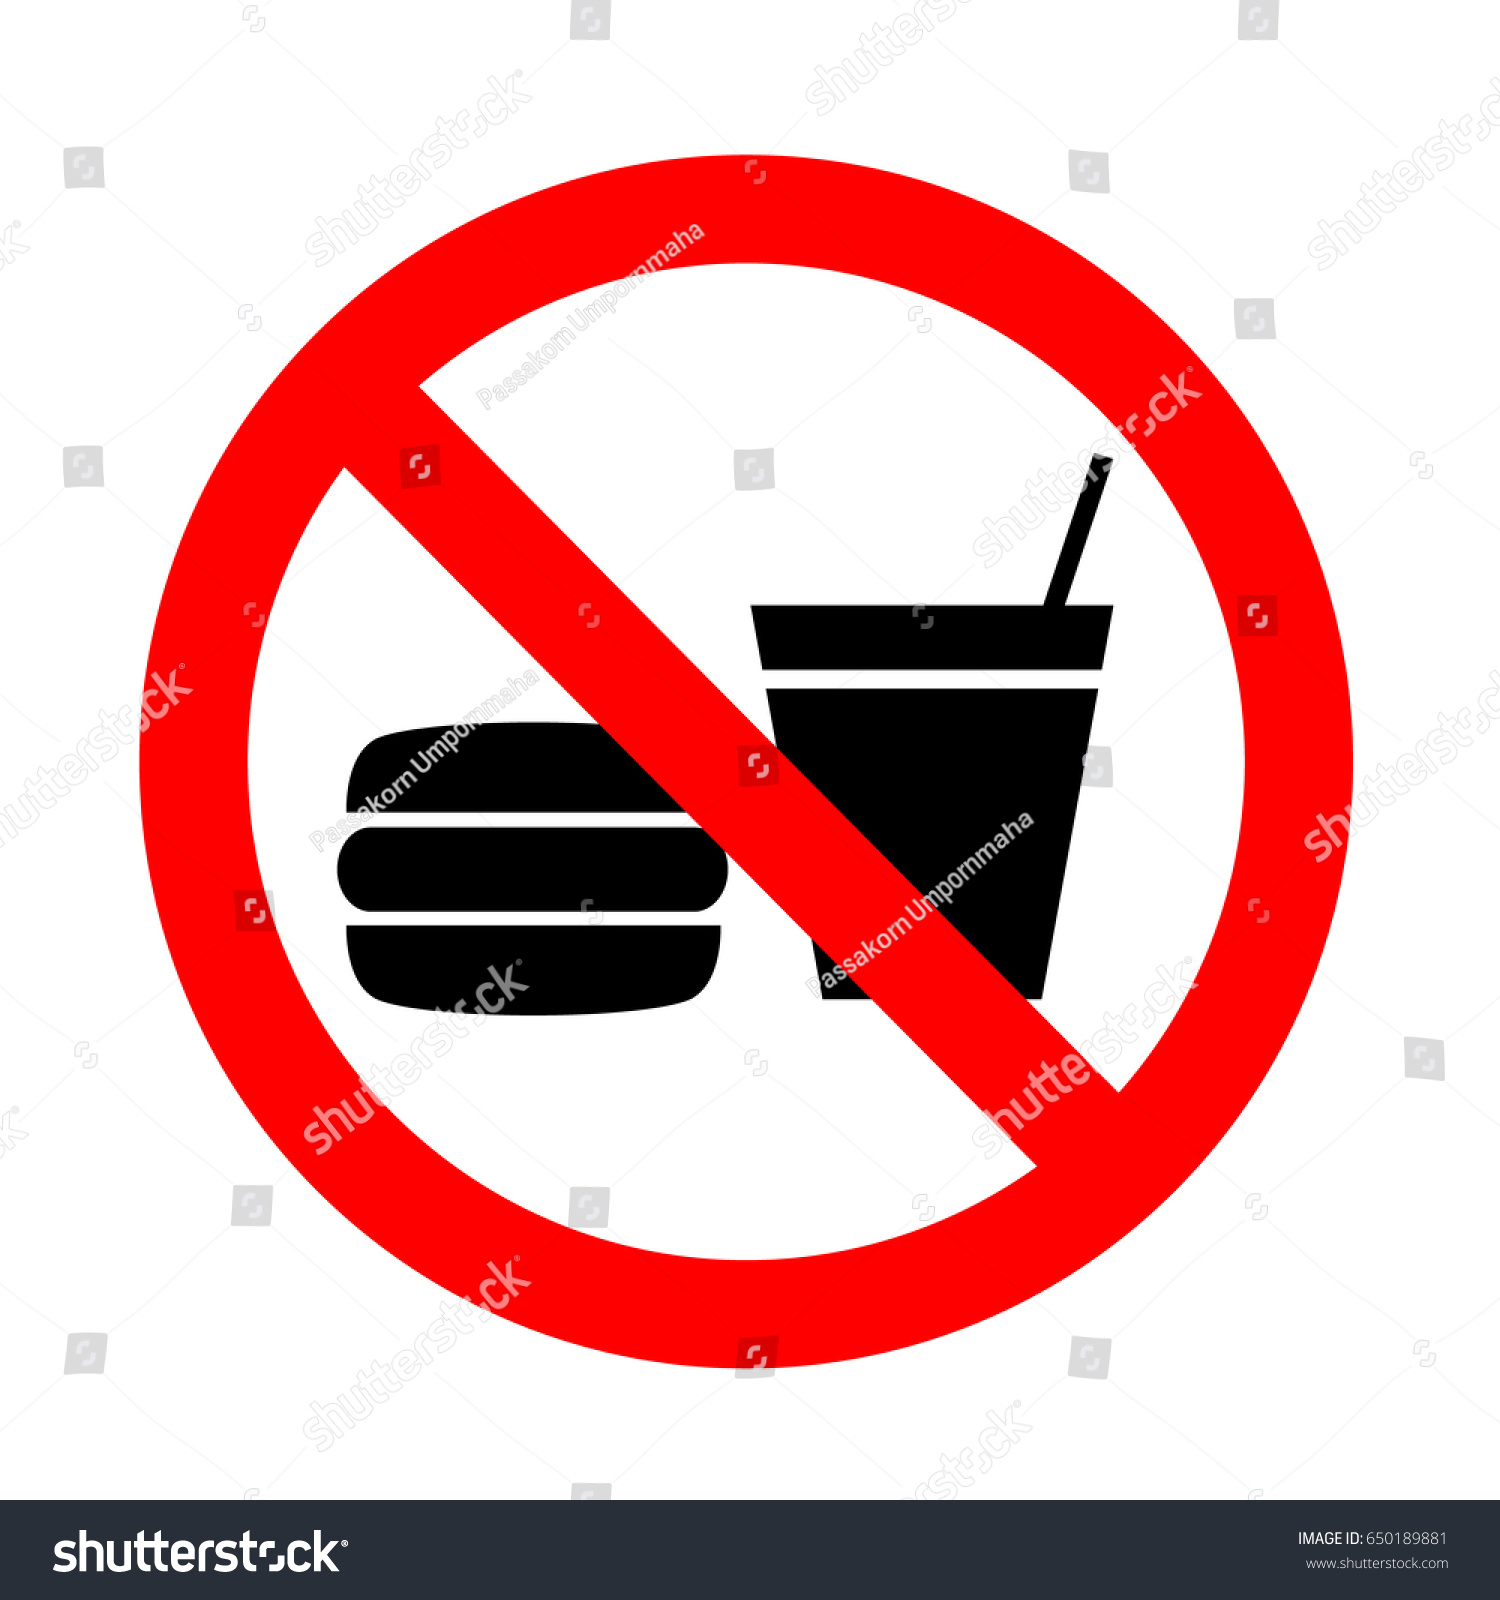 Do Not Eat Drink Sign Stock Vector (Royalty Free) 650189881